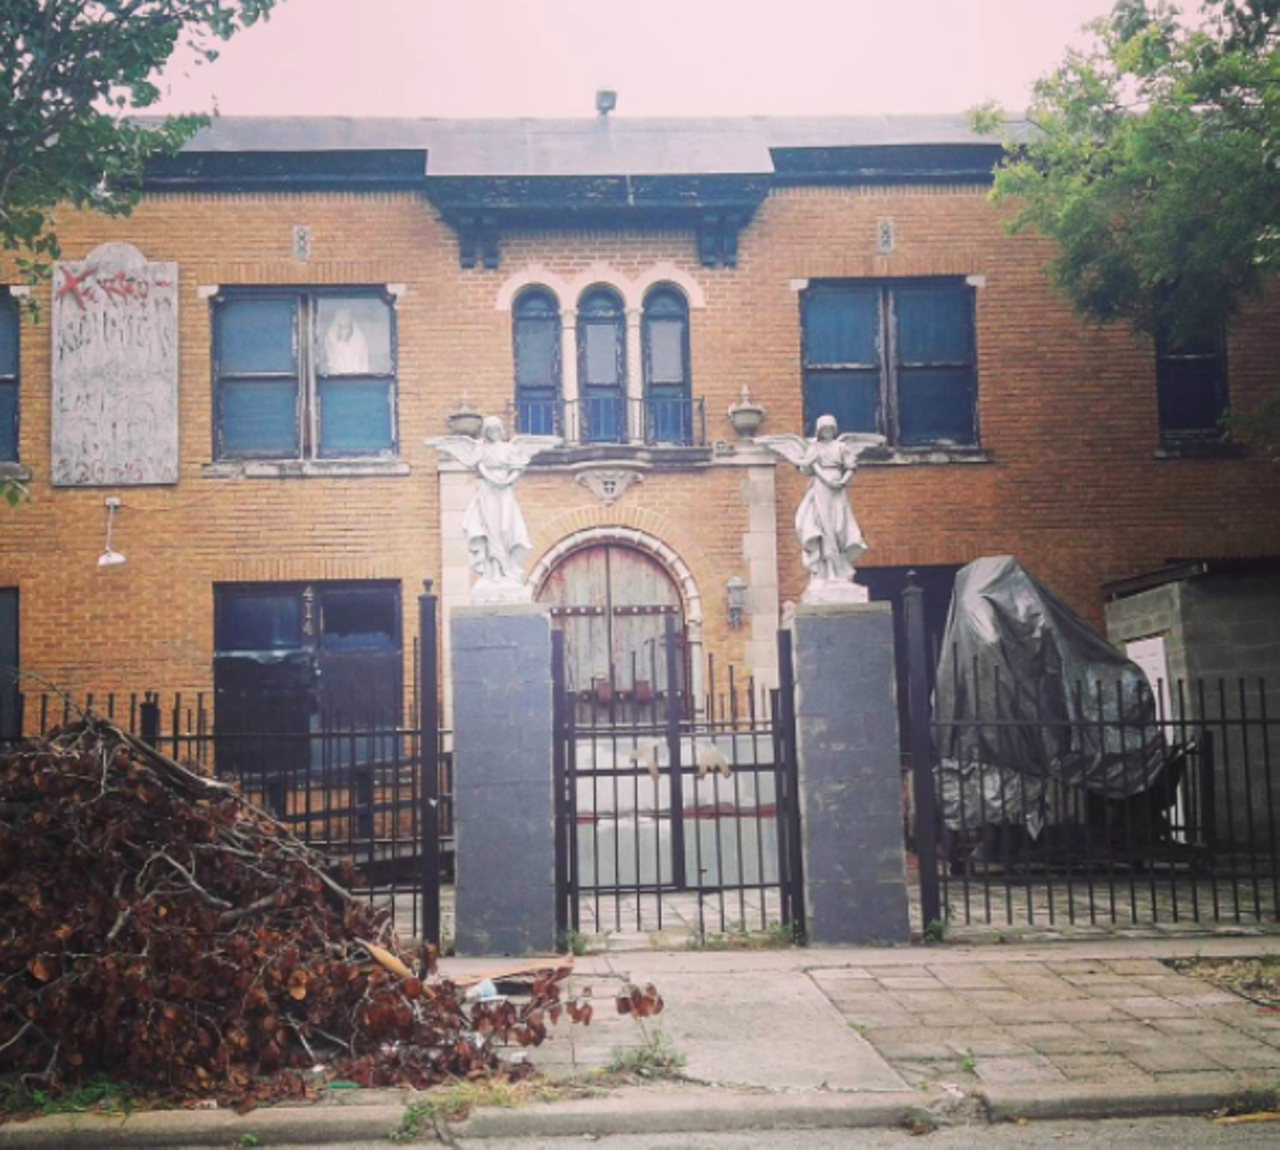 Terror Mansion
414 W Laurel, (210) 226-2666, terrormansionusa.com
Connect with the after life at one of San Antonio’s signature haunted houses. Terror Mansion’s tips for survival? Prayer and a rosary.
Photo via Instagram, nigel_blaque88